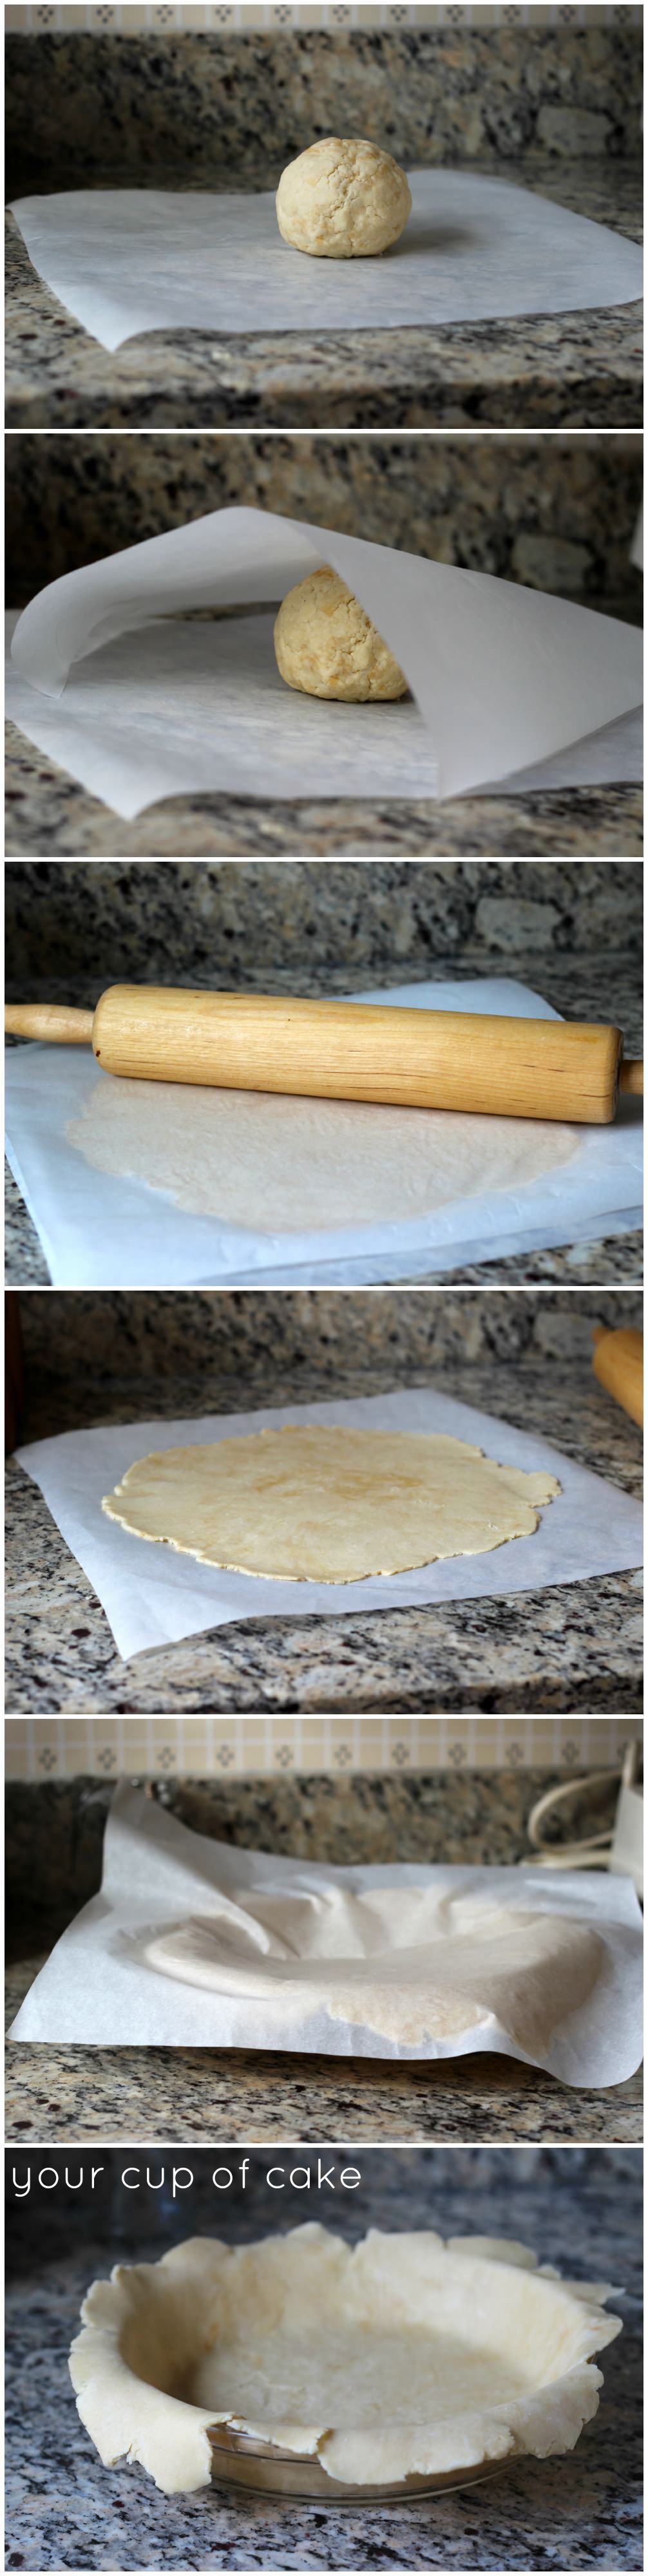 How to roll out pie crust without leaving holes